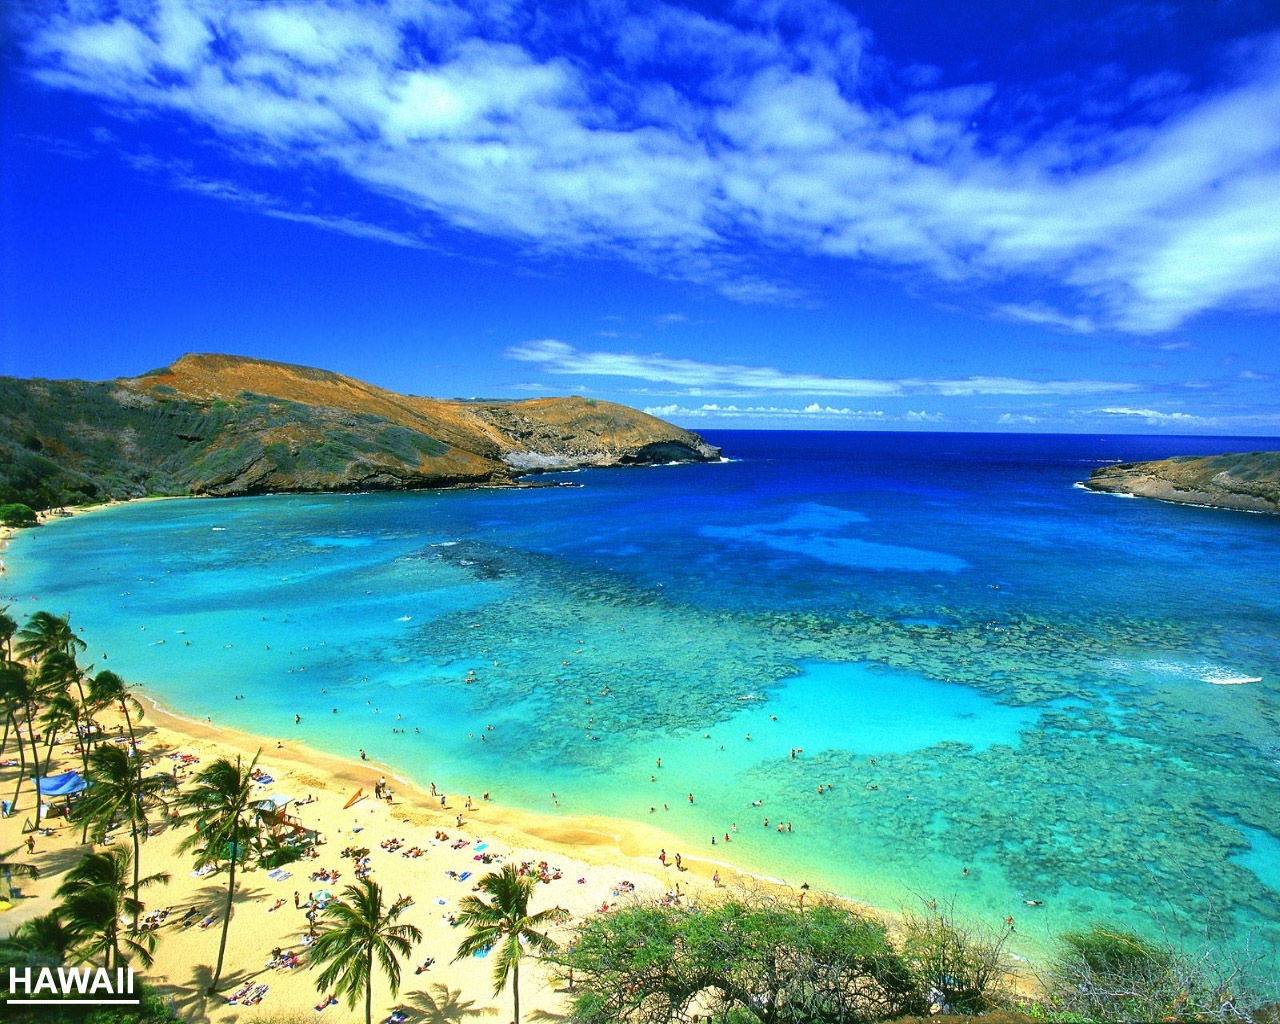 Hawaii Wallpaper Free HD Backgrounds Images Pictures